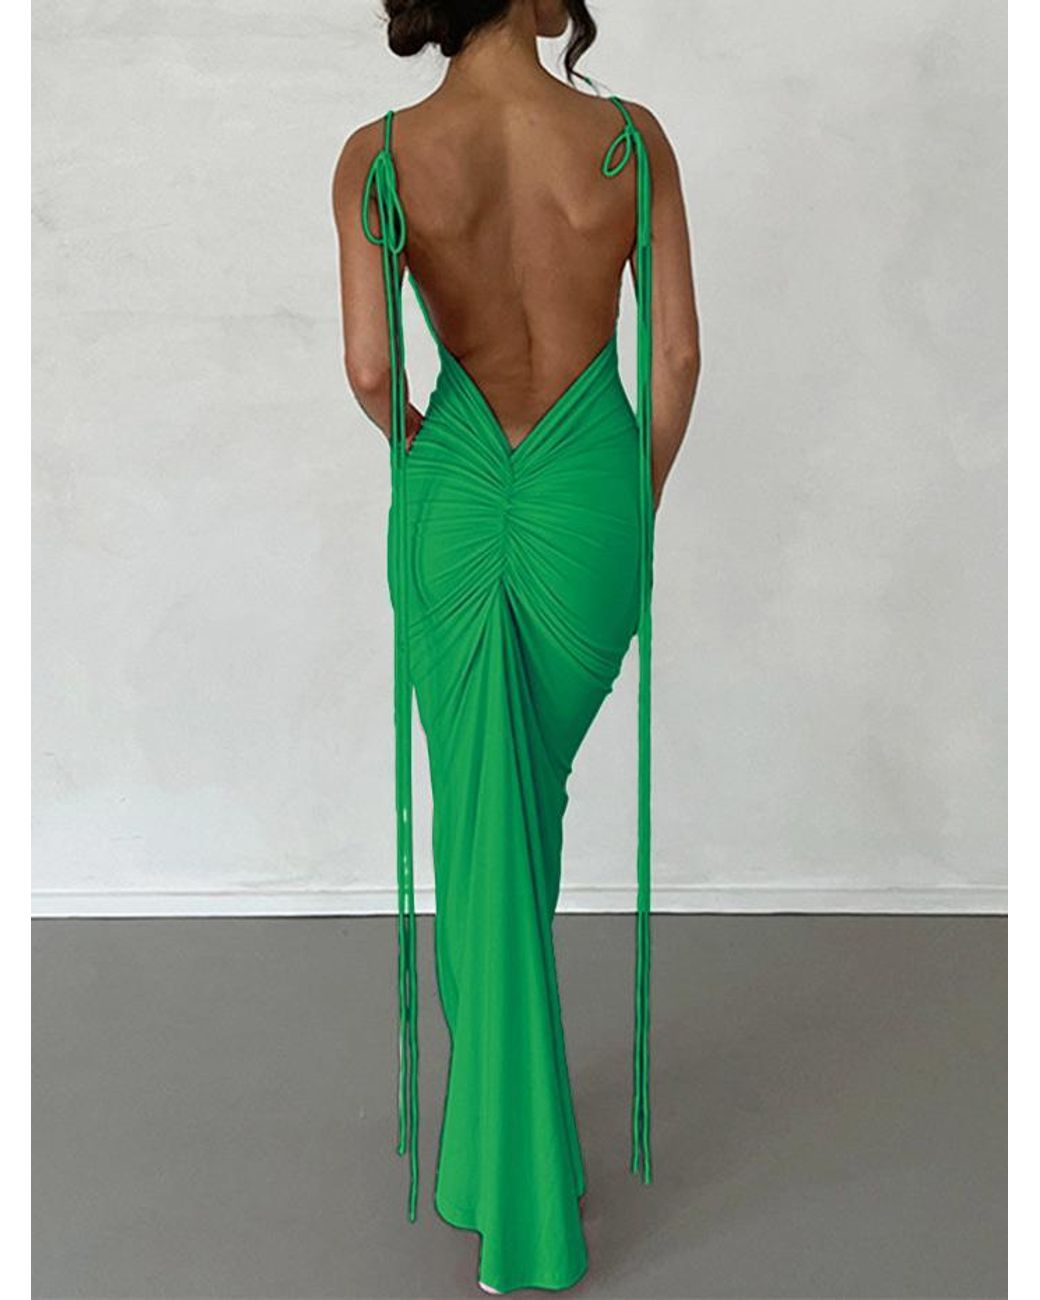 Zaful Sexy Solid Color Multi Way Spaghetti Strap Tie Cinched Ruched  Backless Slinky Empire Waist Maxi Cami Vegas Dress For Party in Green | Lyst